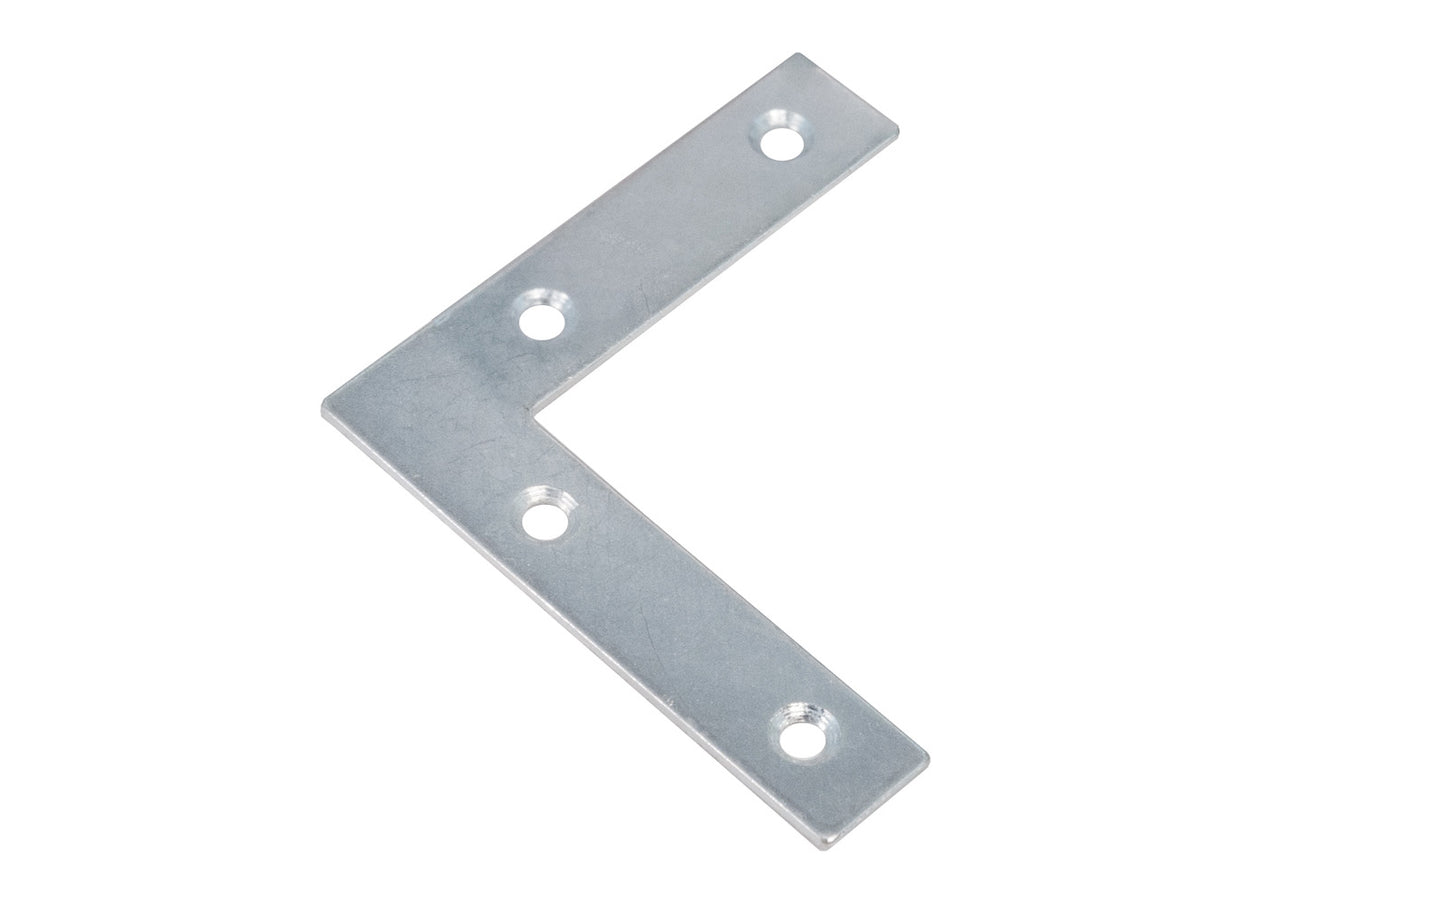 4" Zinc-Plated Flat Corner Iron. These flat corner irons are designed for furniture, cabinets, shelving support, etc. Steel material with a zinc plated finish. Countersunk holes. Sold as singles, or bulk box of (20) flat corner braces. 4"  long x 4" long size. Screws not included.